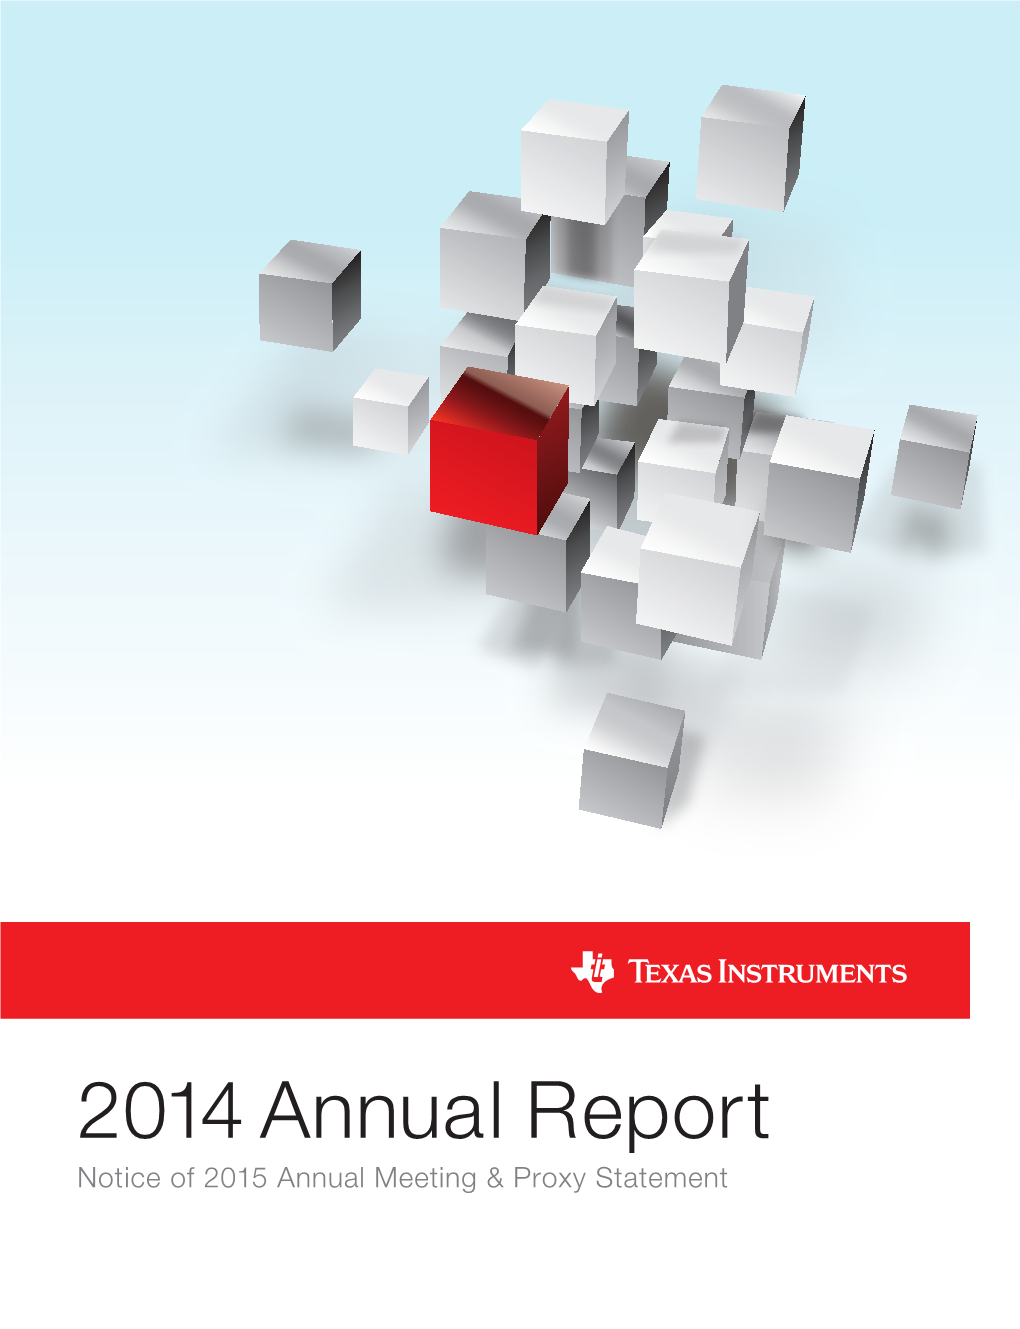 2014 Annual Report Notice of 2015 Annual Meeting & Proxy Statement Board of Directors, Executive Officers